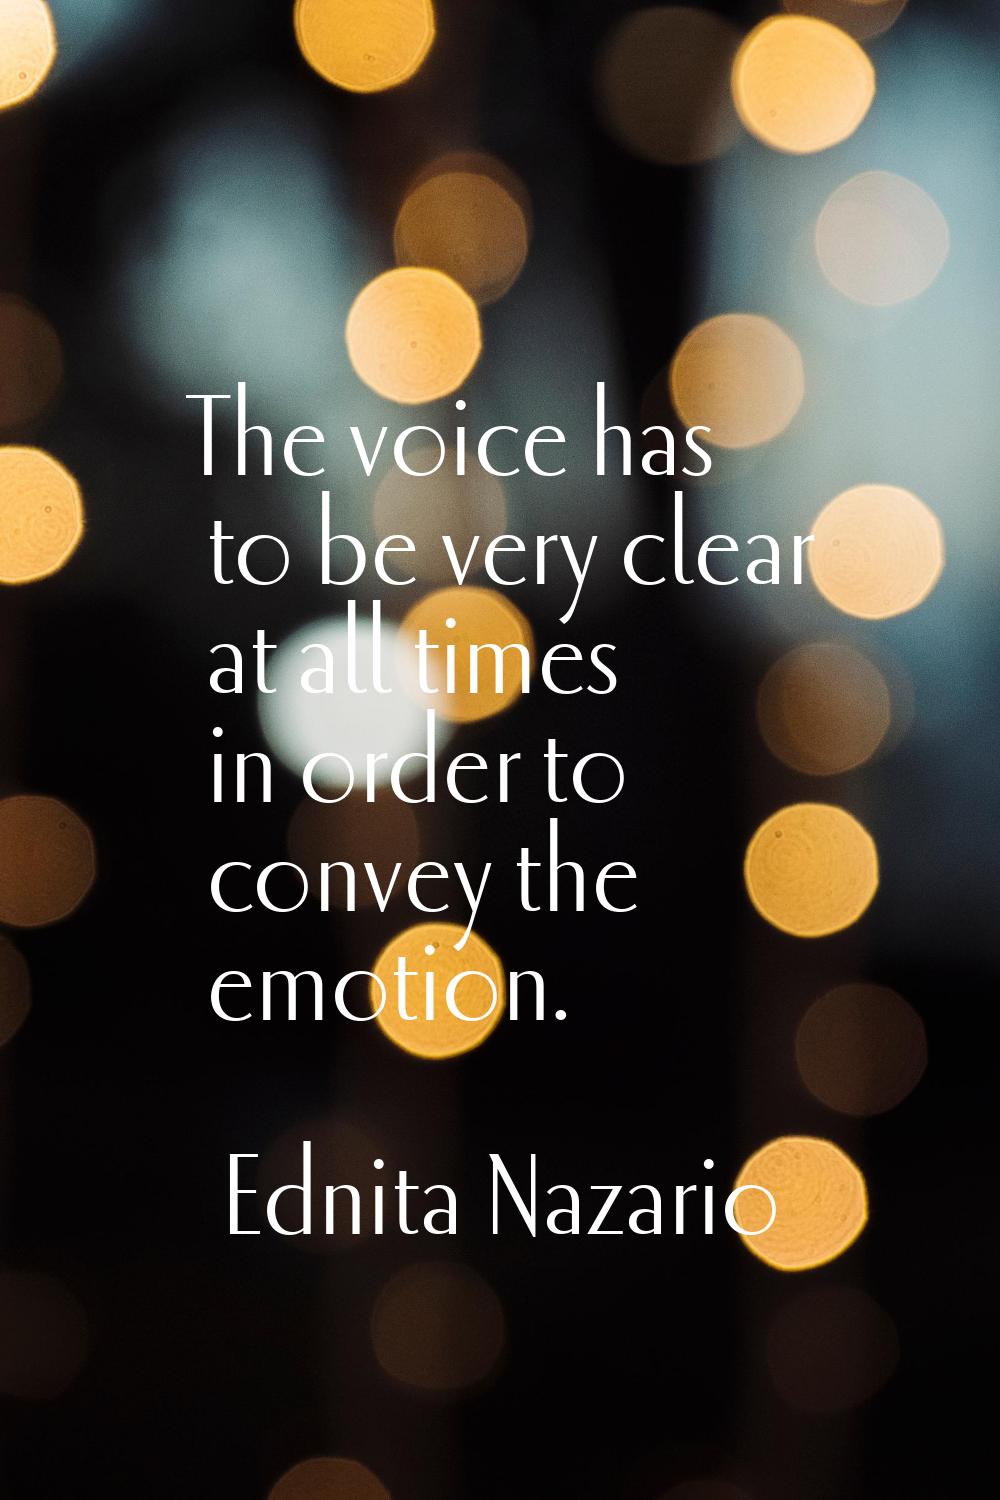 The voice has to be very clear at all times in order to convey the emotion.